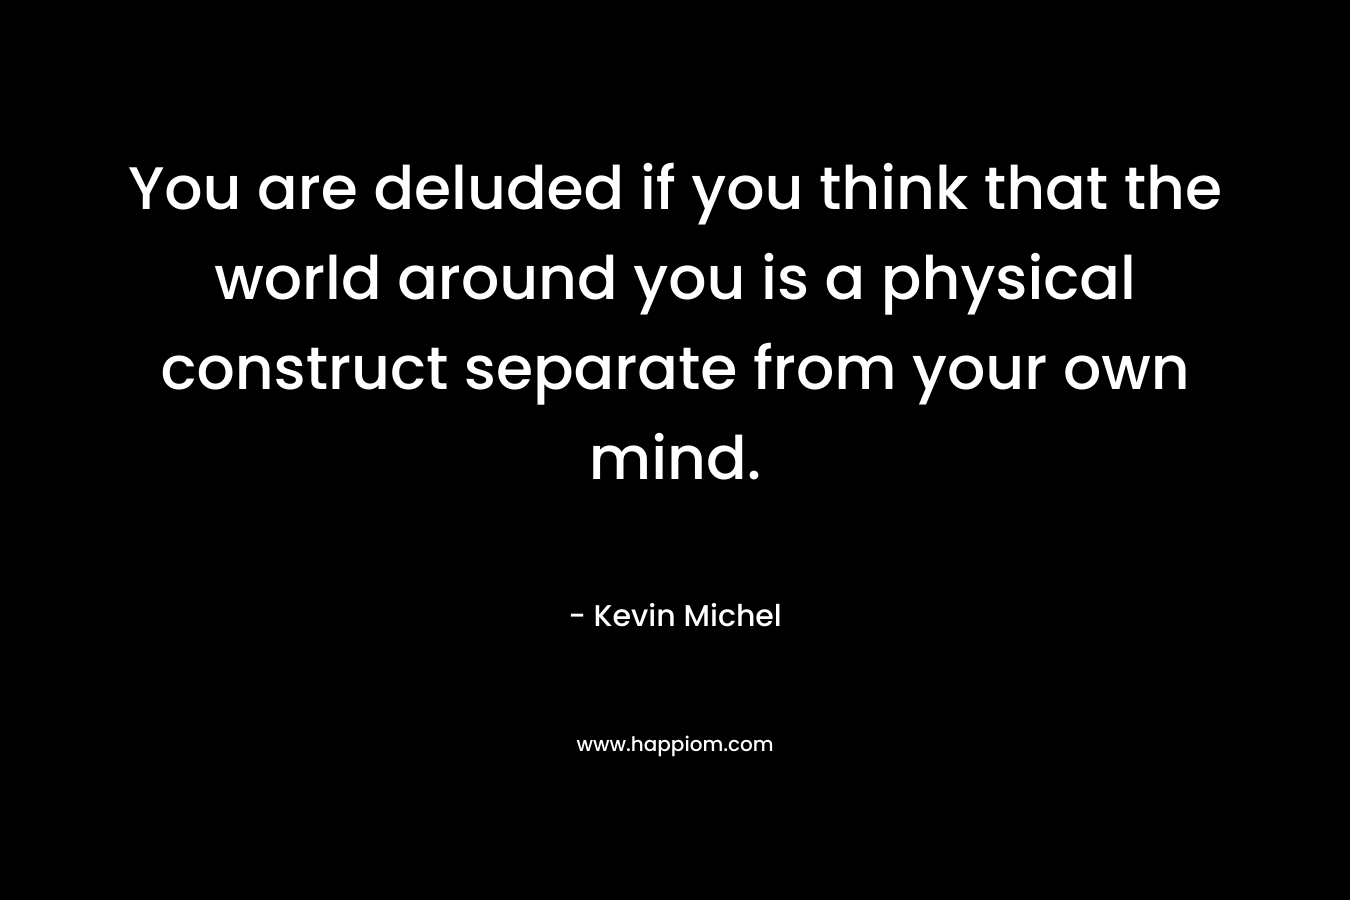 You are deluded if you think that the world around you is a physical construct separate from your own mind. – Kevin Michel